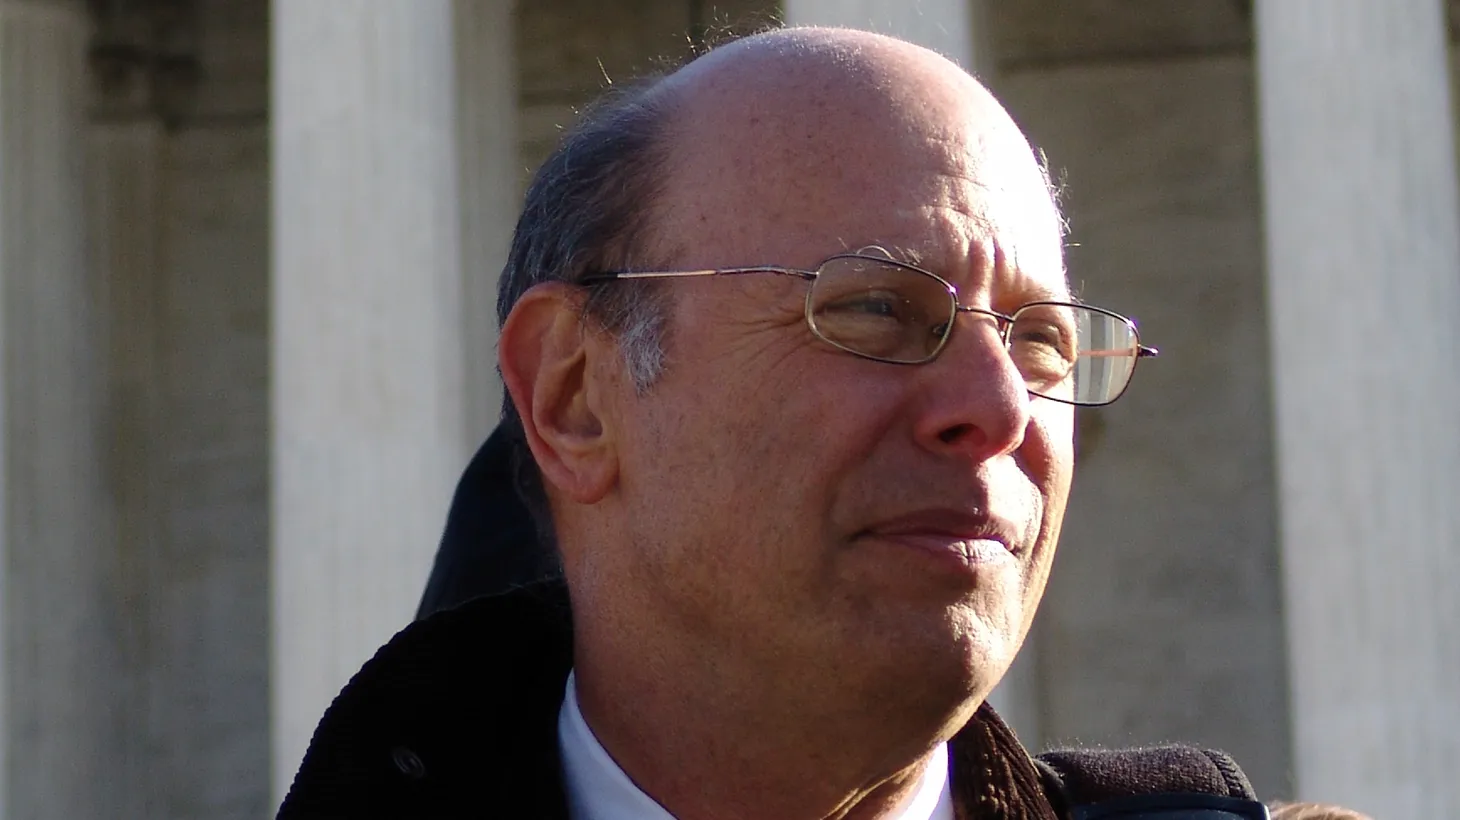 Michael Ratner, President of the Center for Constitutional Rights, in front of the US Supreme Court in Washington DC, 11th January 2006.